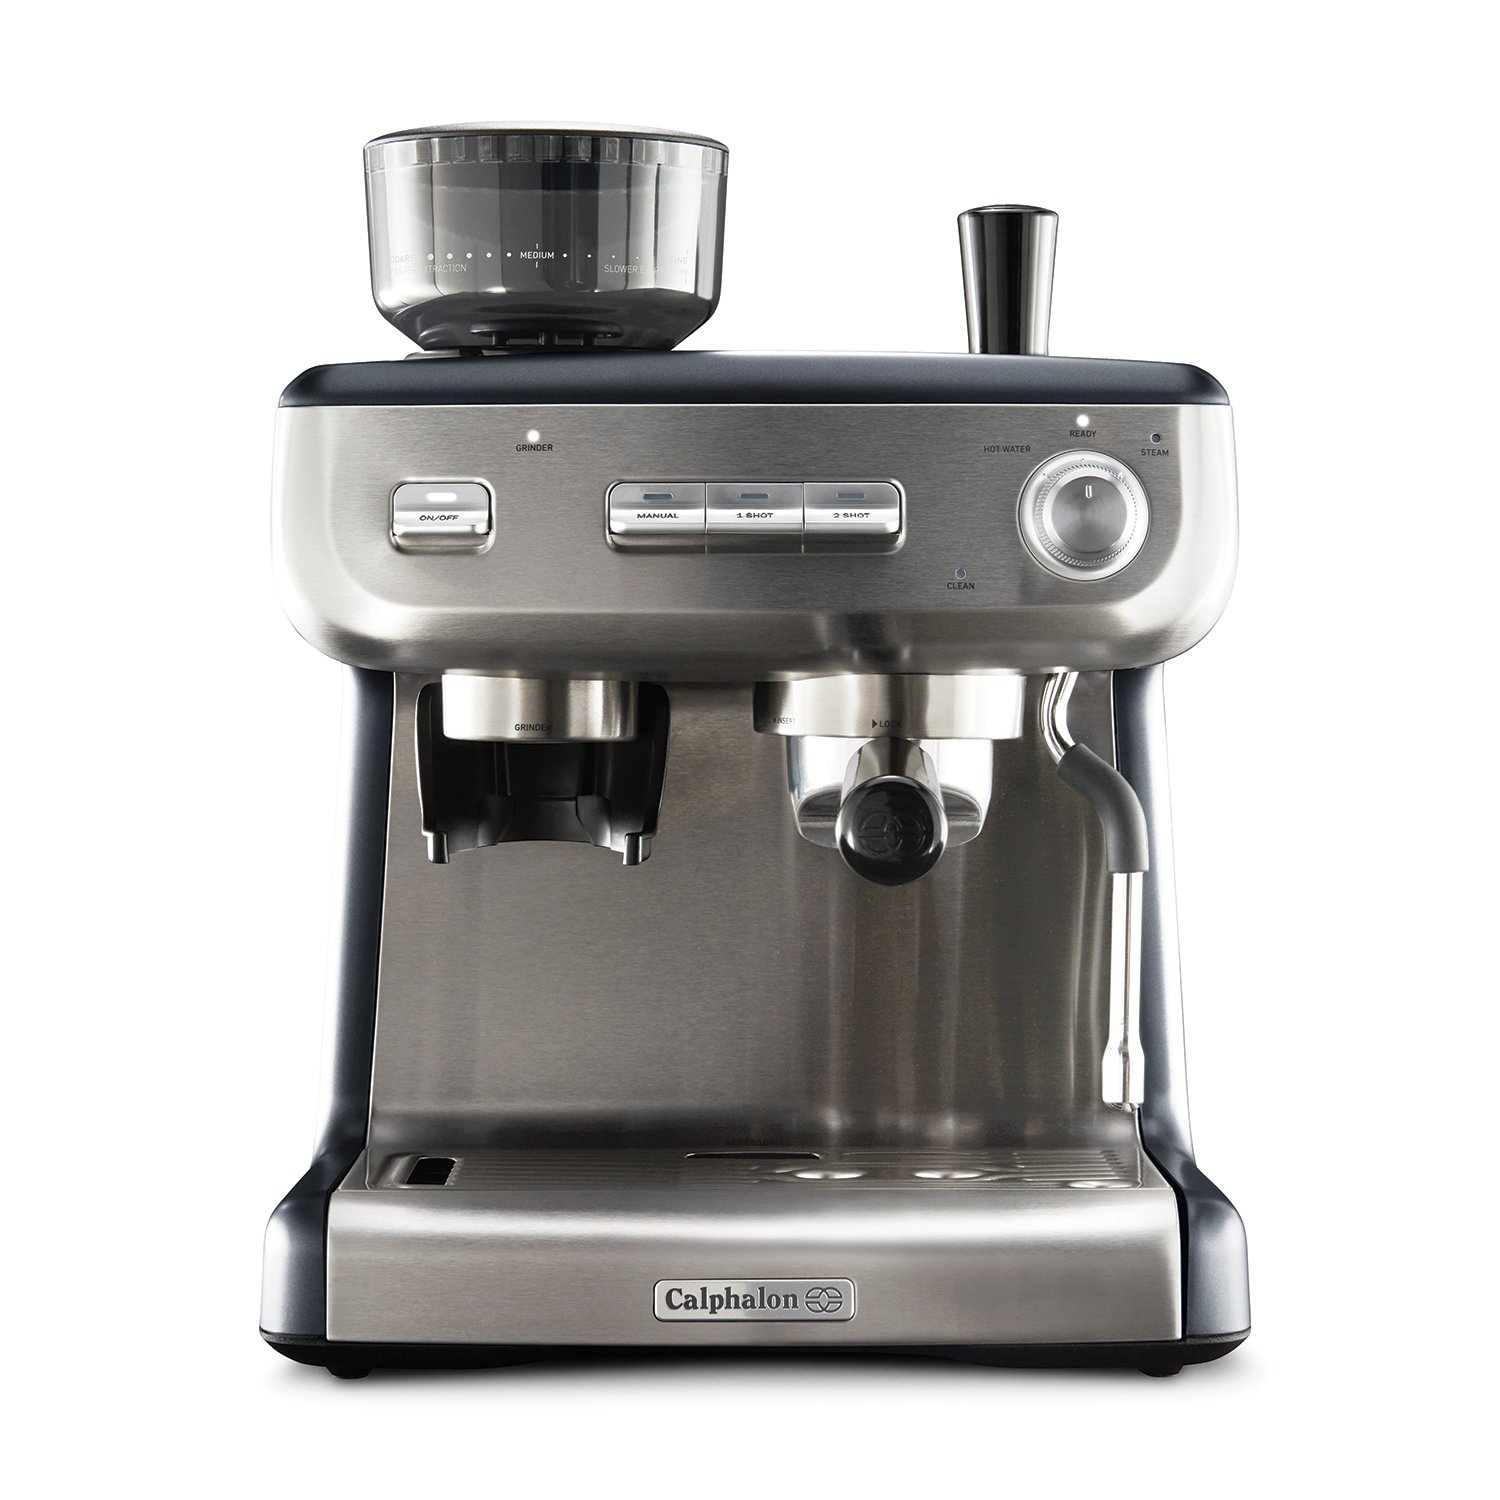 Temp IQ Espresso Machine With Grinder And Steam Wand, Stainless